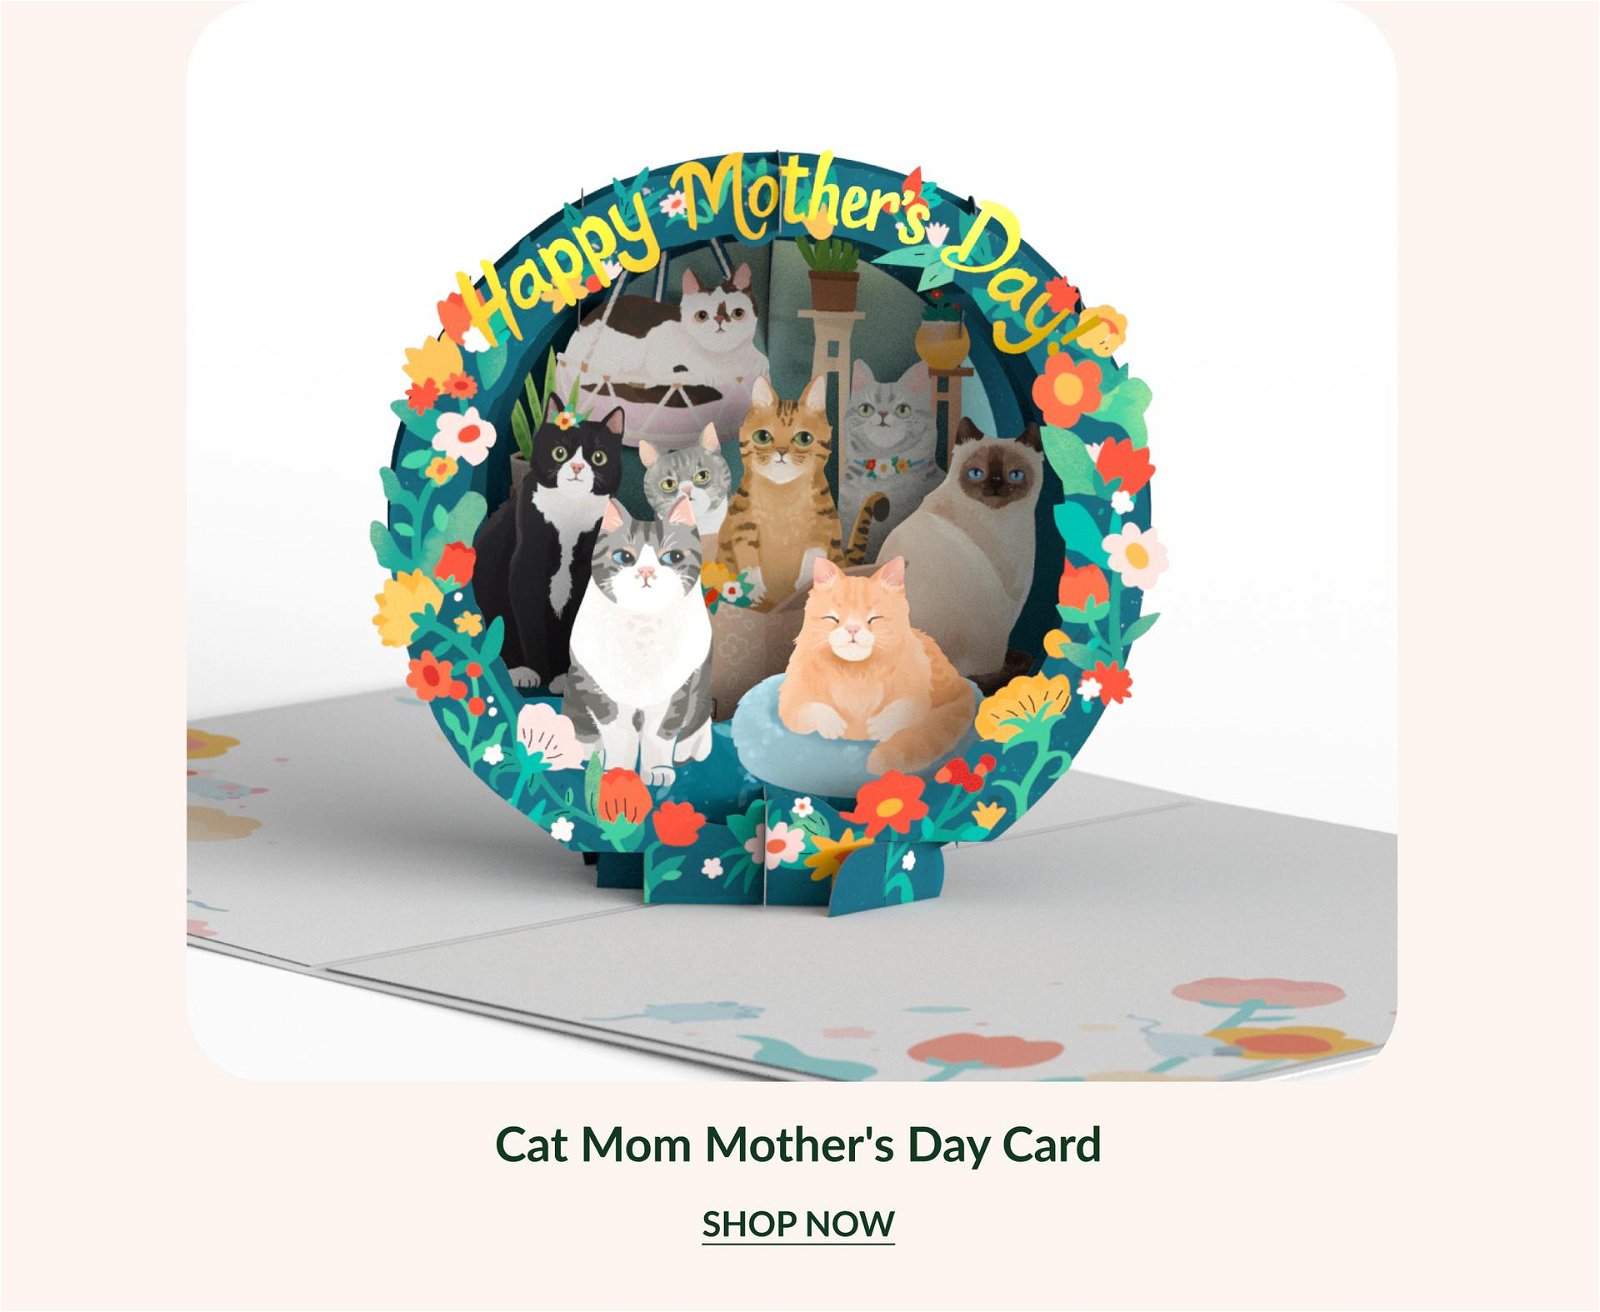 Cat Mom Mother's Day Pop-Up Card